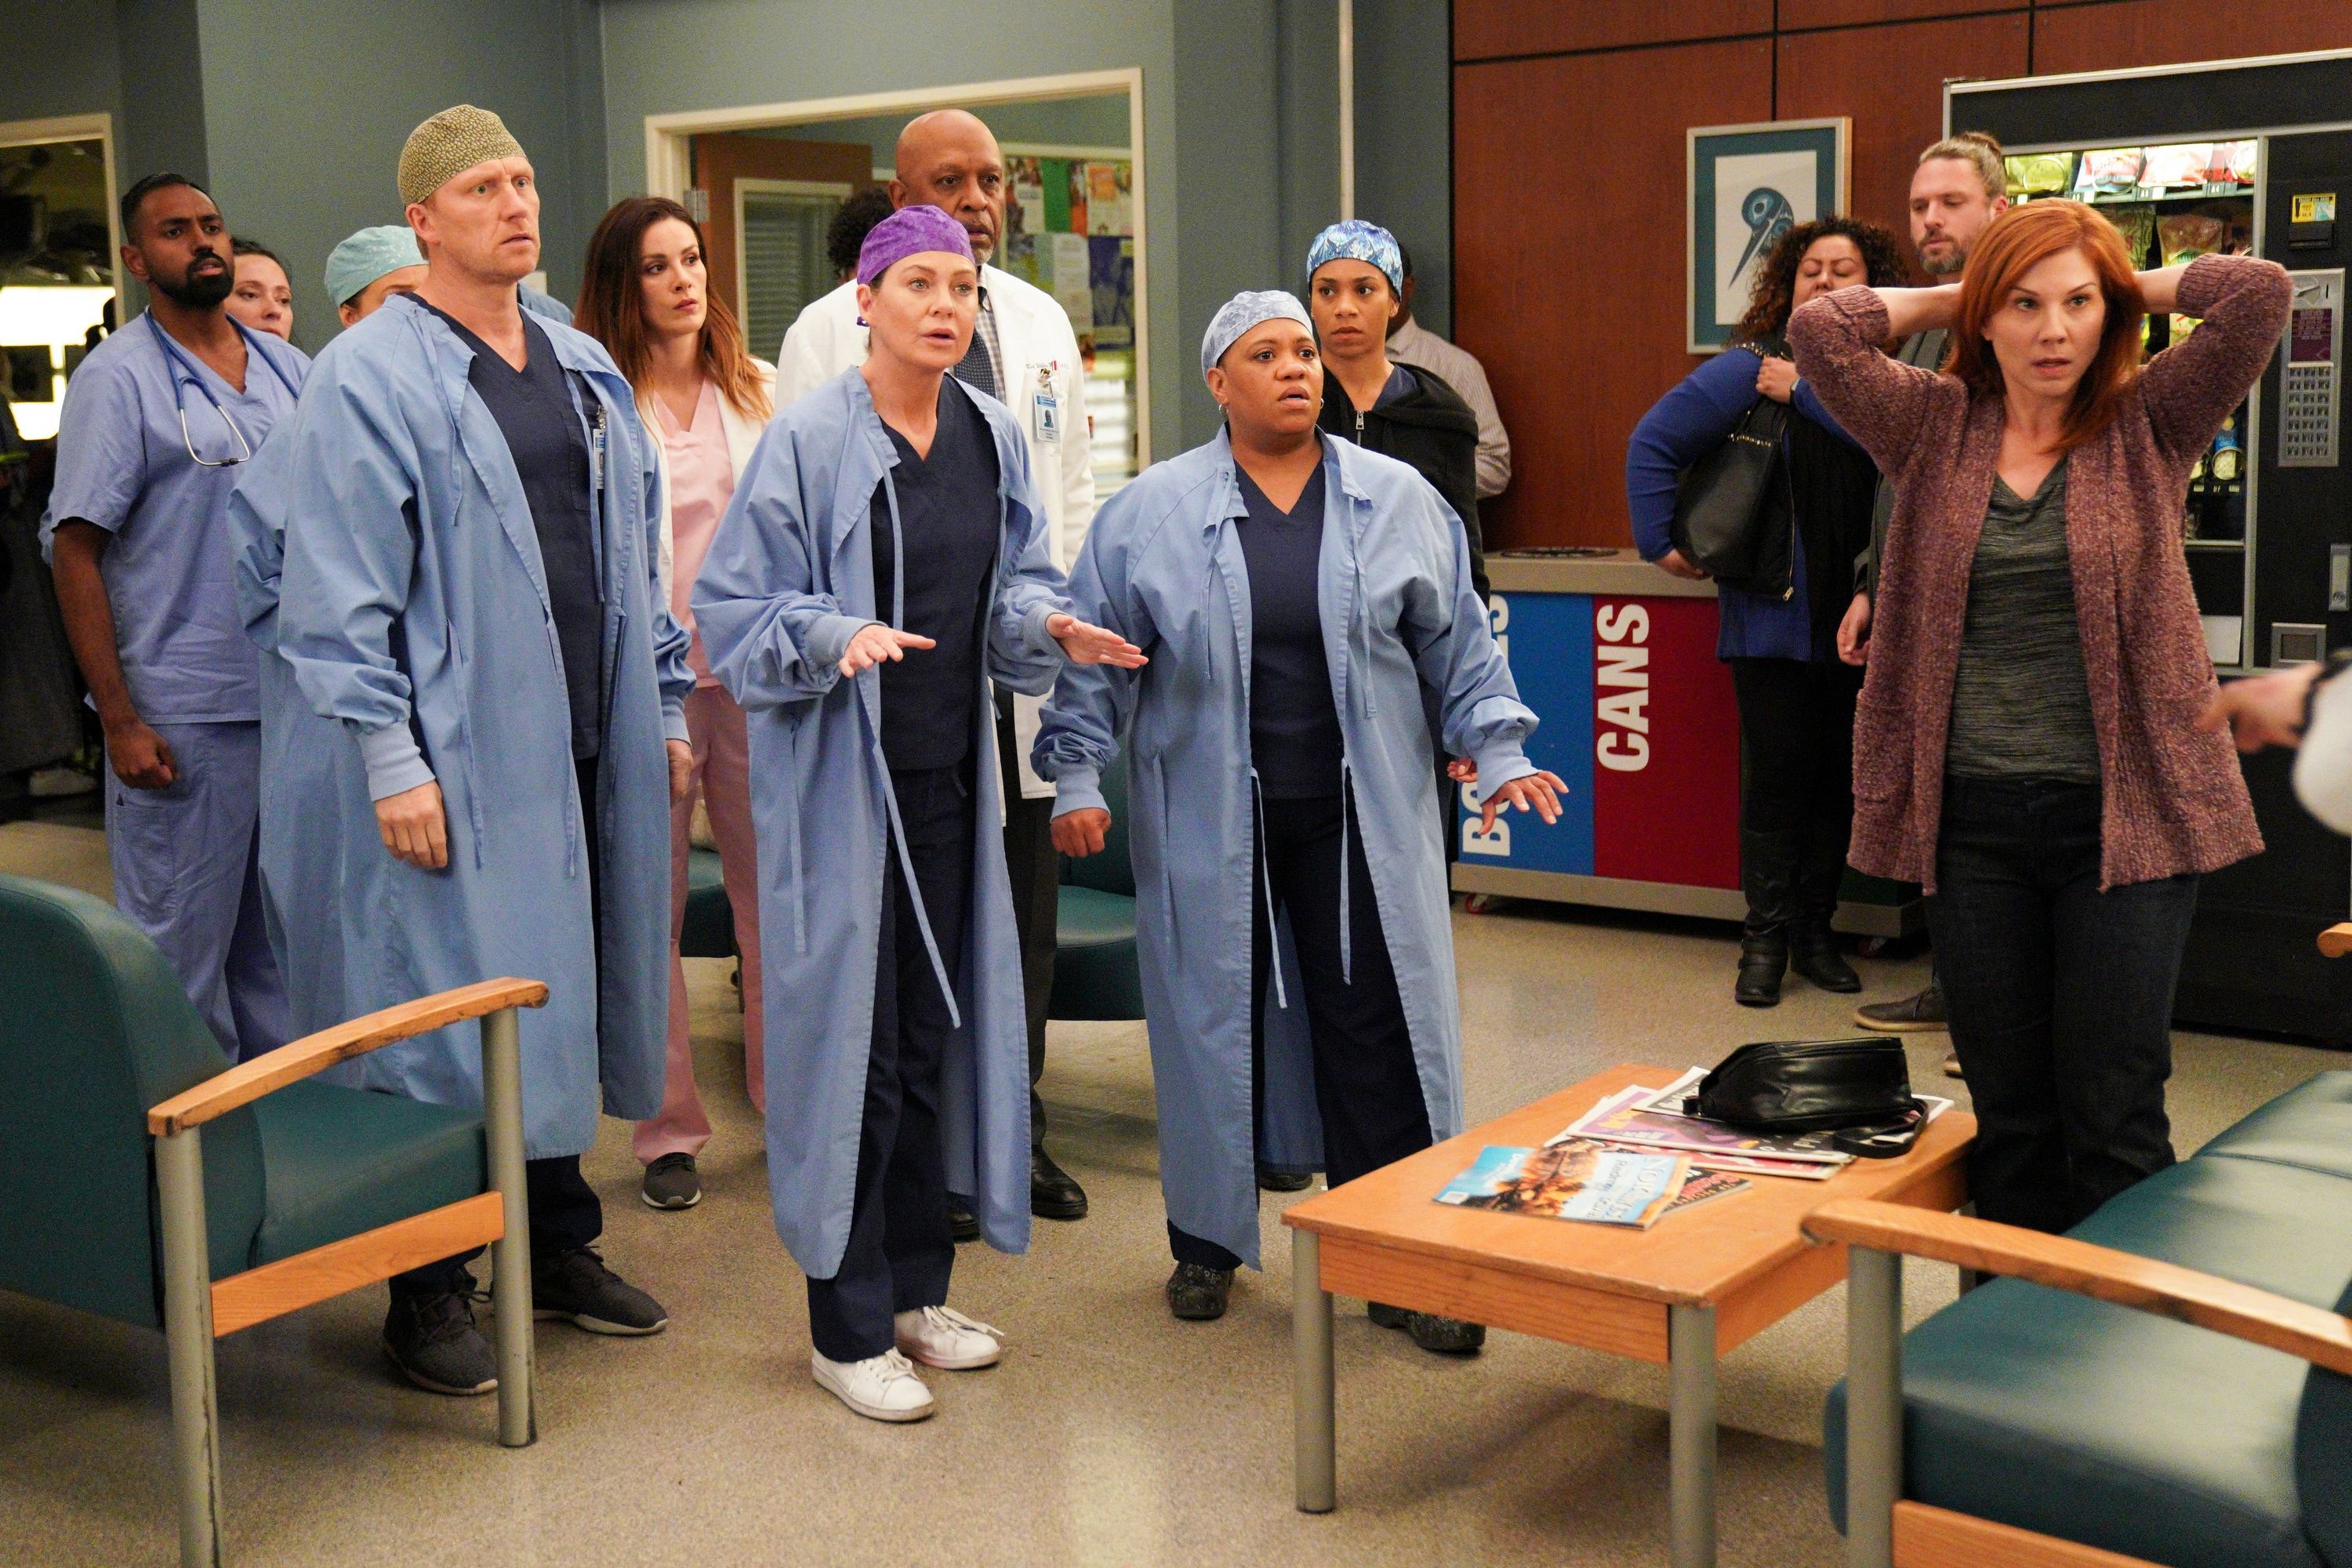 Cast of "Grey's Anatomy" in an episode aired on February 05, 2020 | Photo: Getty Images